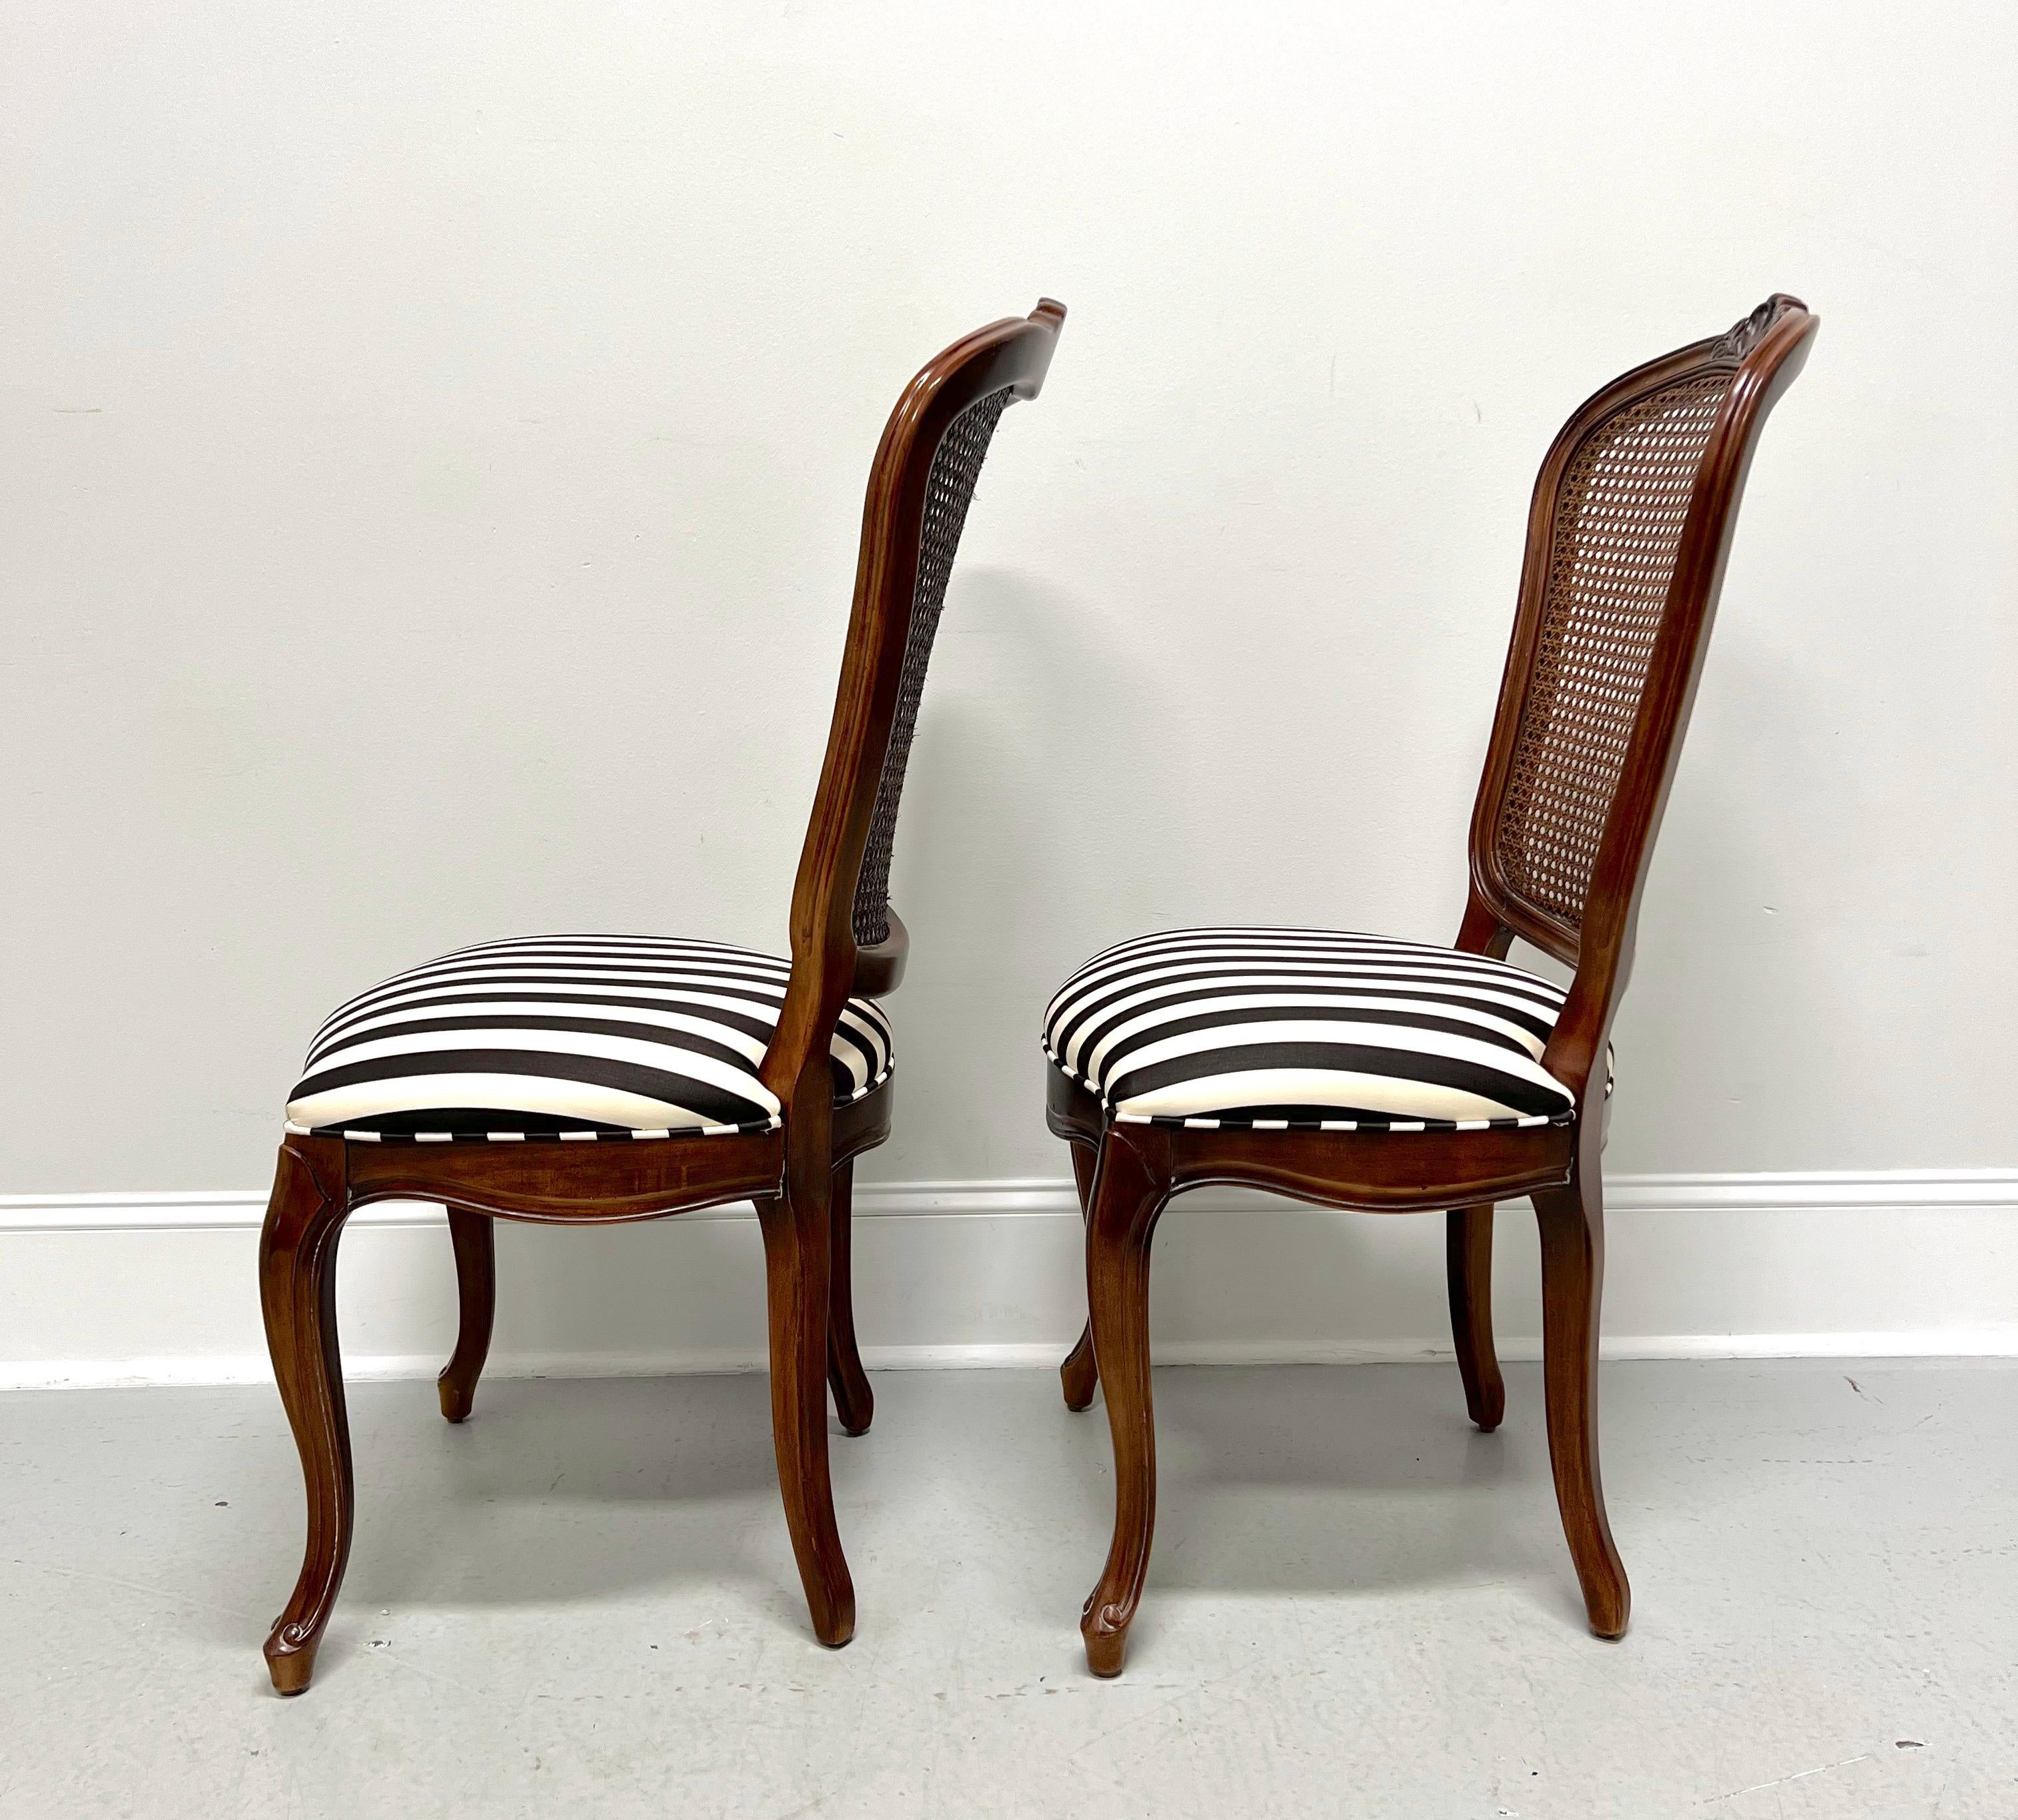 CENTURY Chardeau Collection Cherry Caned French Dining Side Chairs - Pair B In Good Condition For Sale In Charlotte, NC